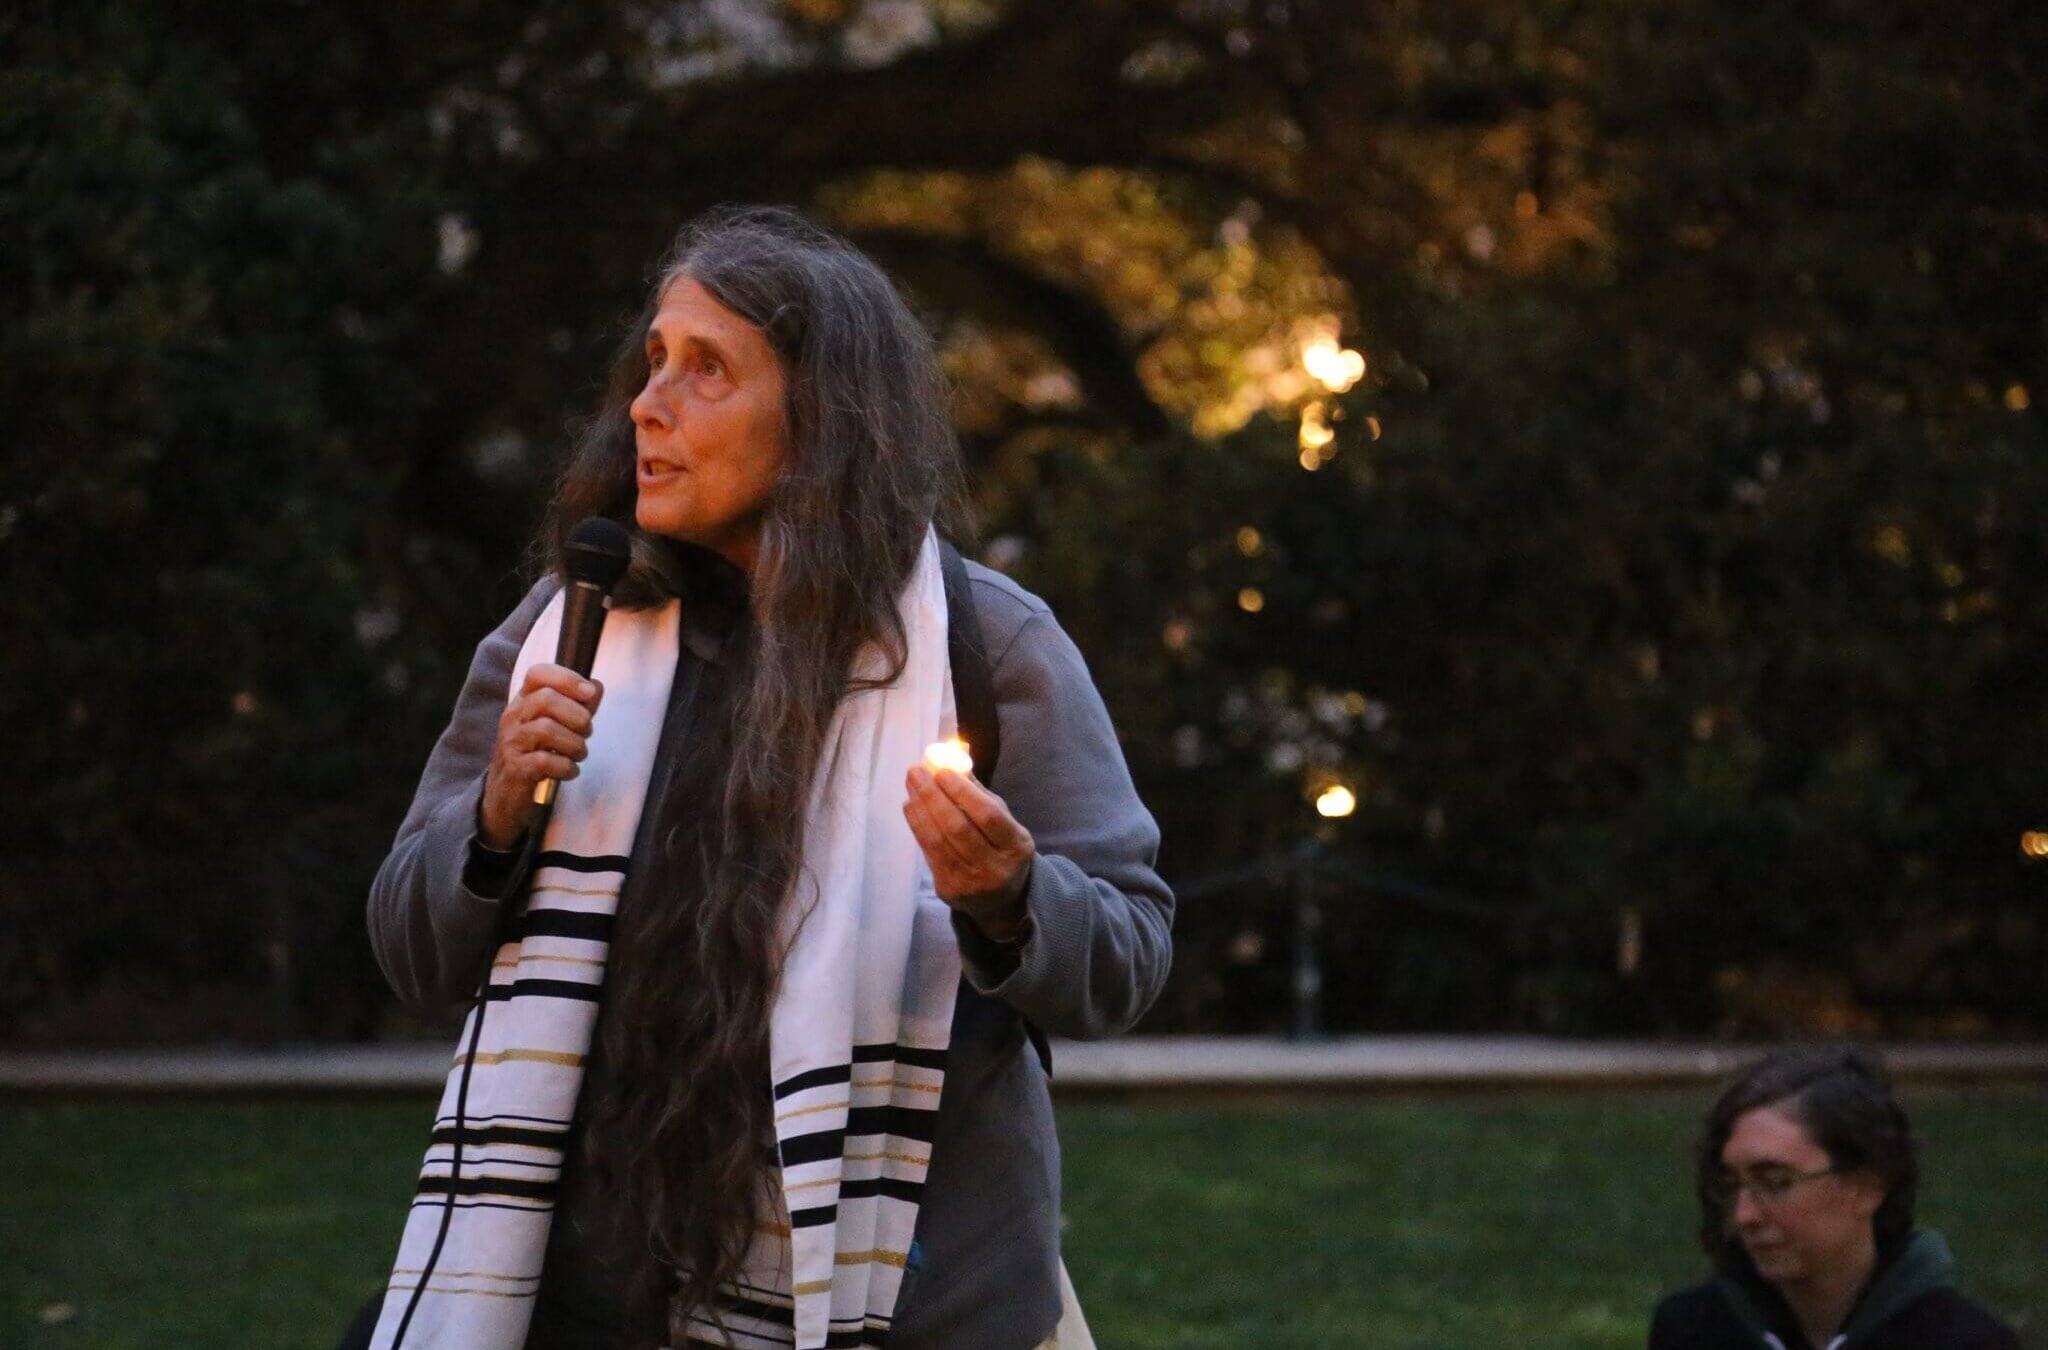 Rabbi Lynn Gottlieb speaks at the  Interfaith Challenge to Protest Curfew in New York in 2015. Gottlieb is celebrating 50 years as a rabbi this September.